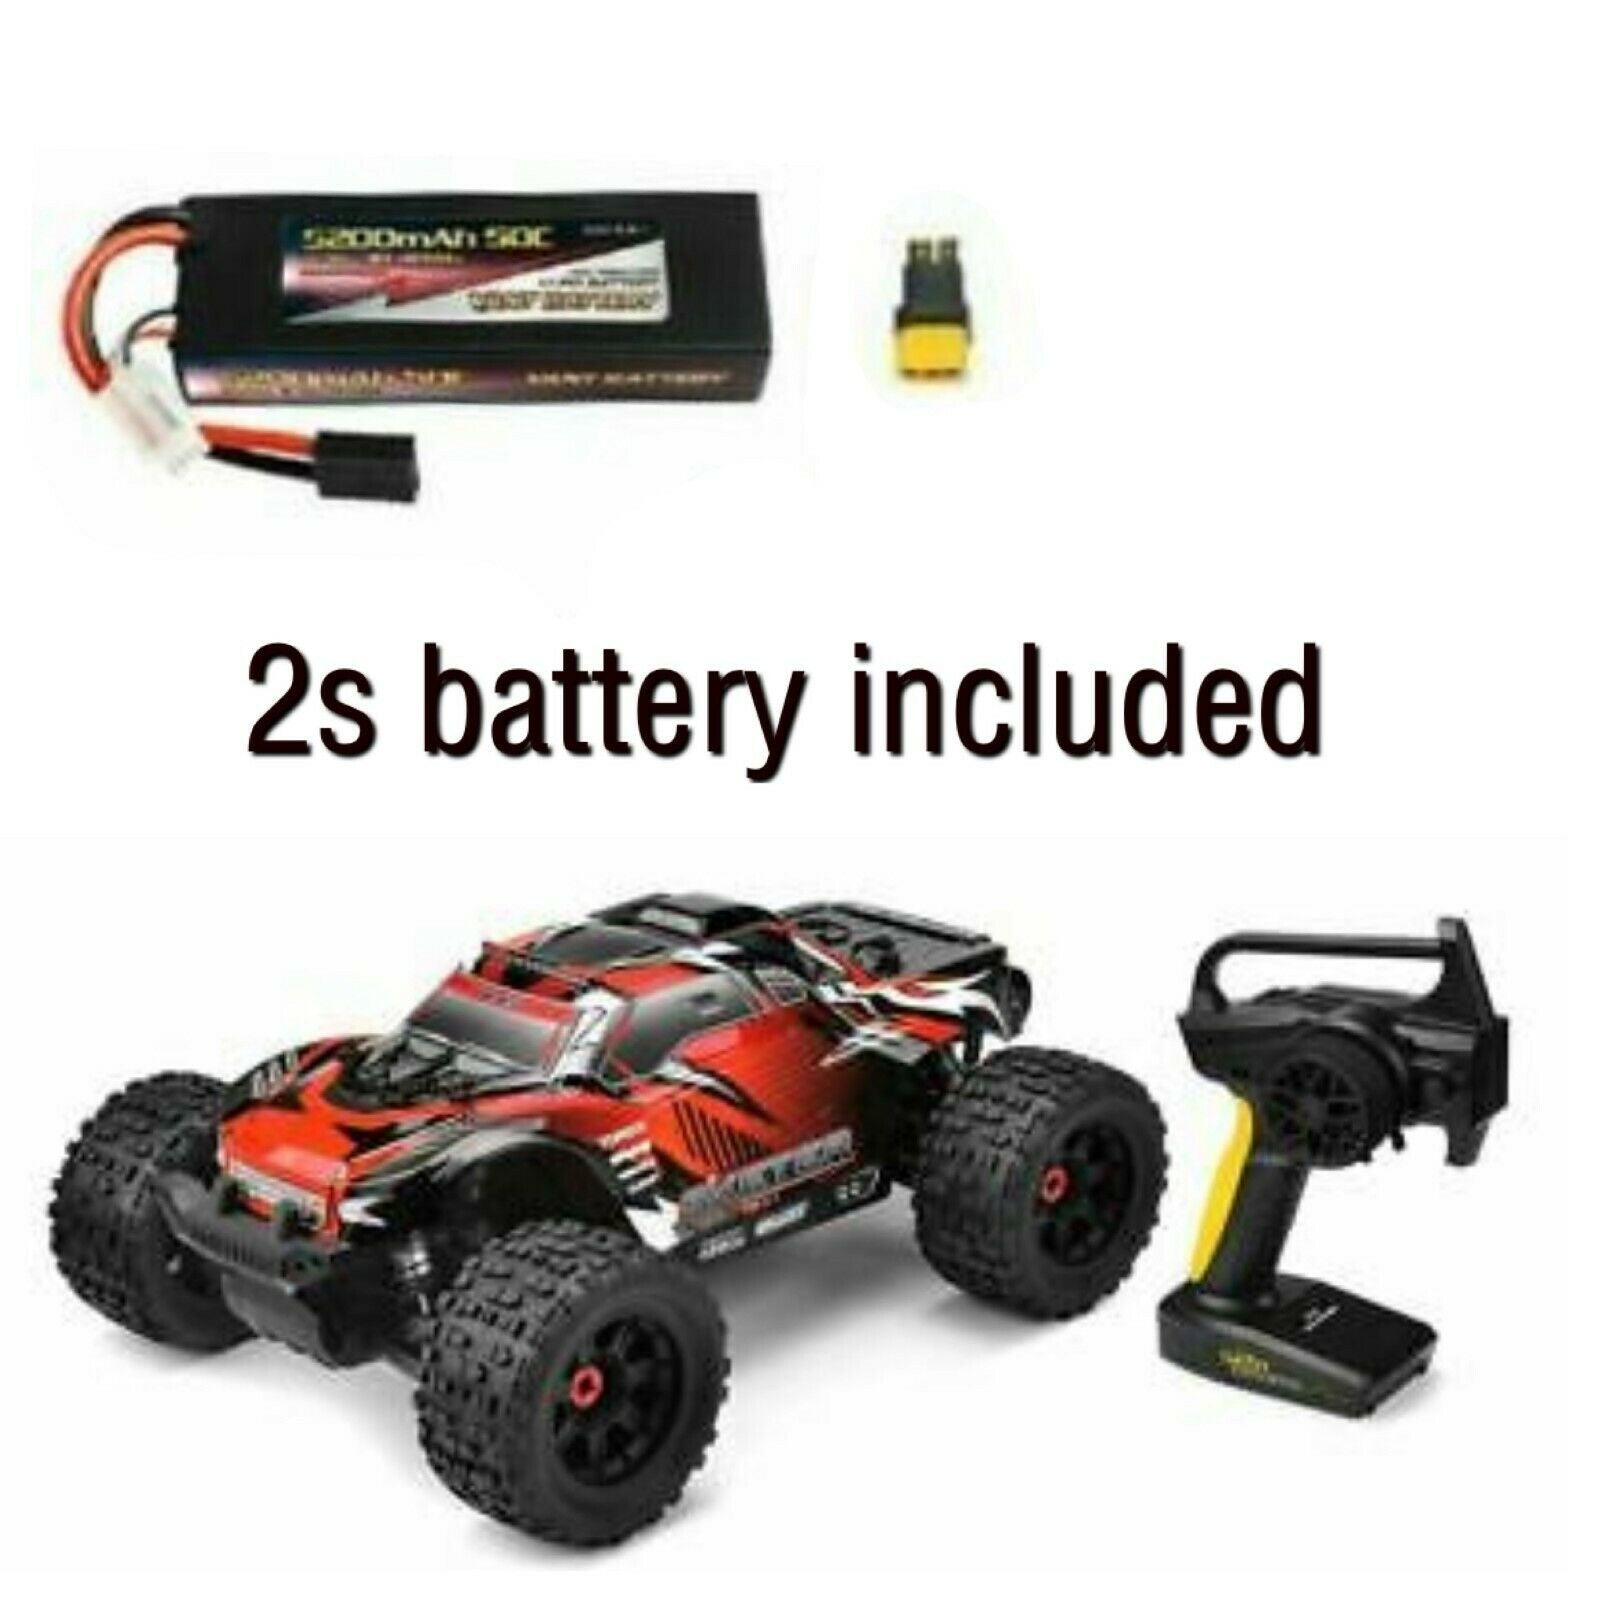 Corally  Sketer XP 1/10 4WD 4S Brushless RTR Monster Truck W/ 5200MAH 2S LIPO